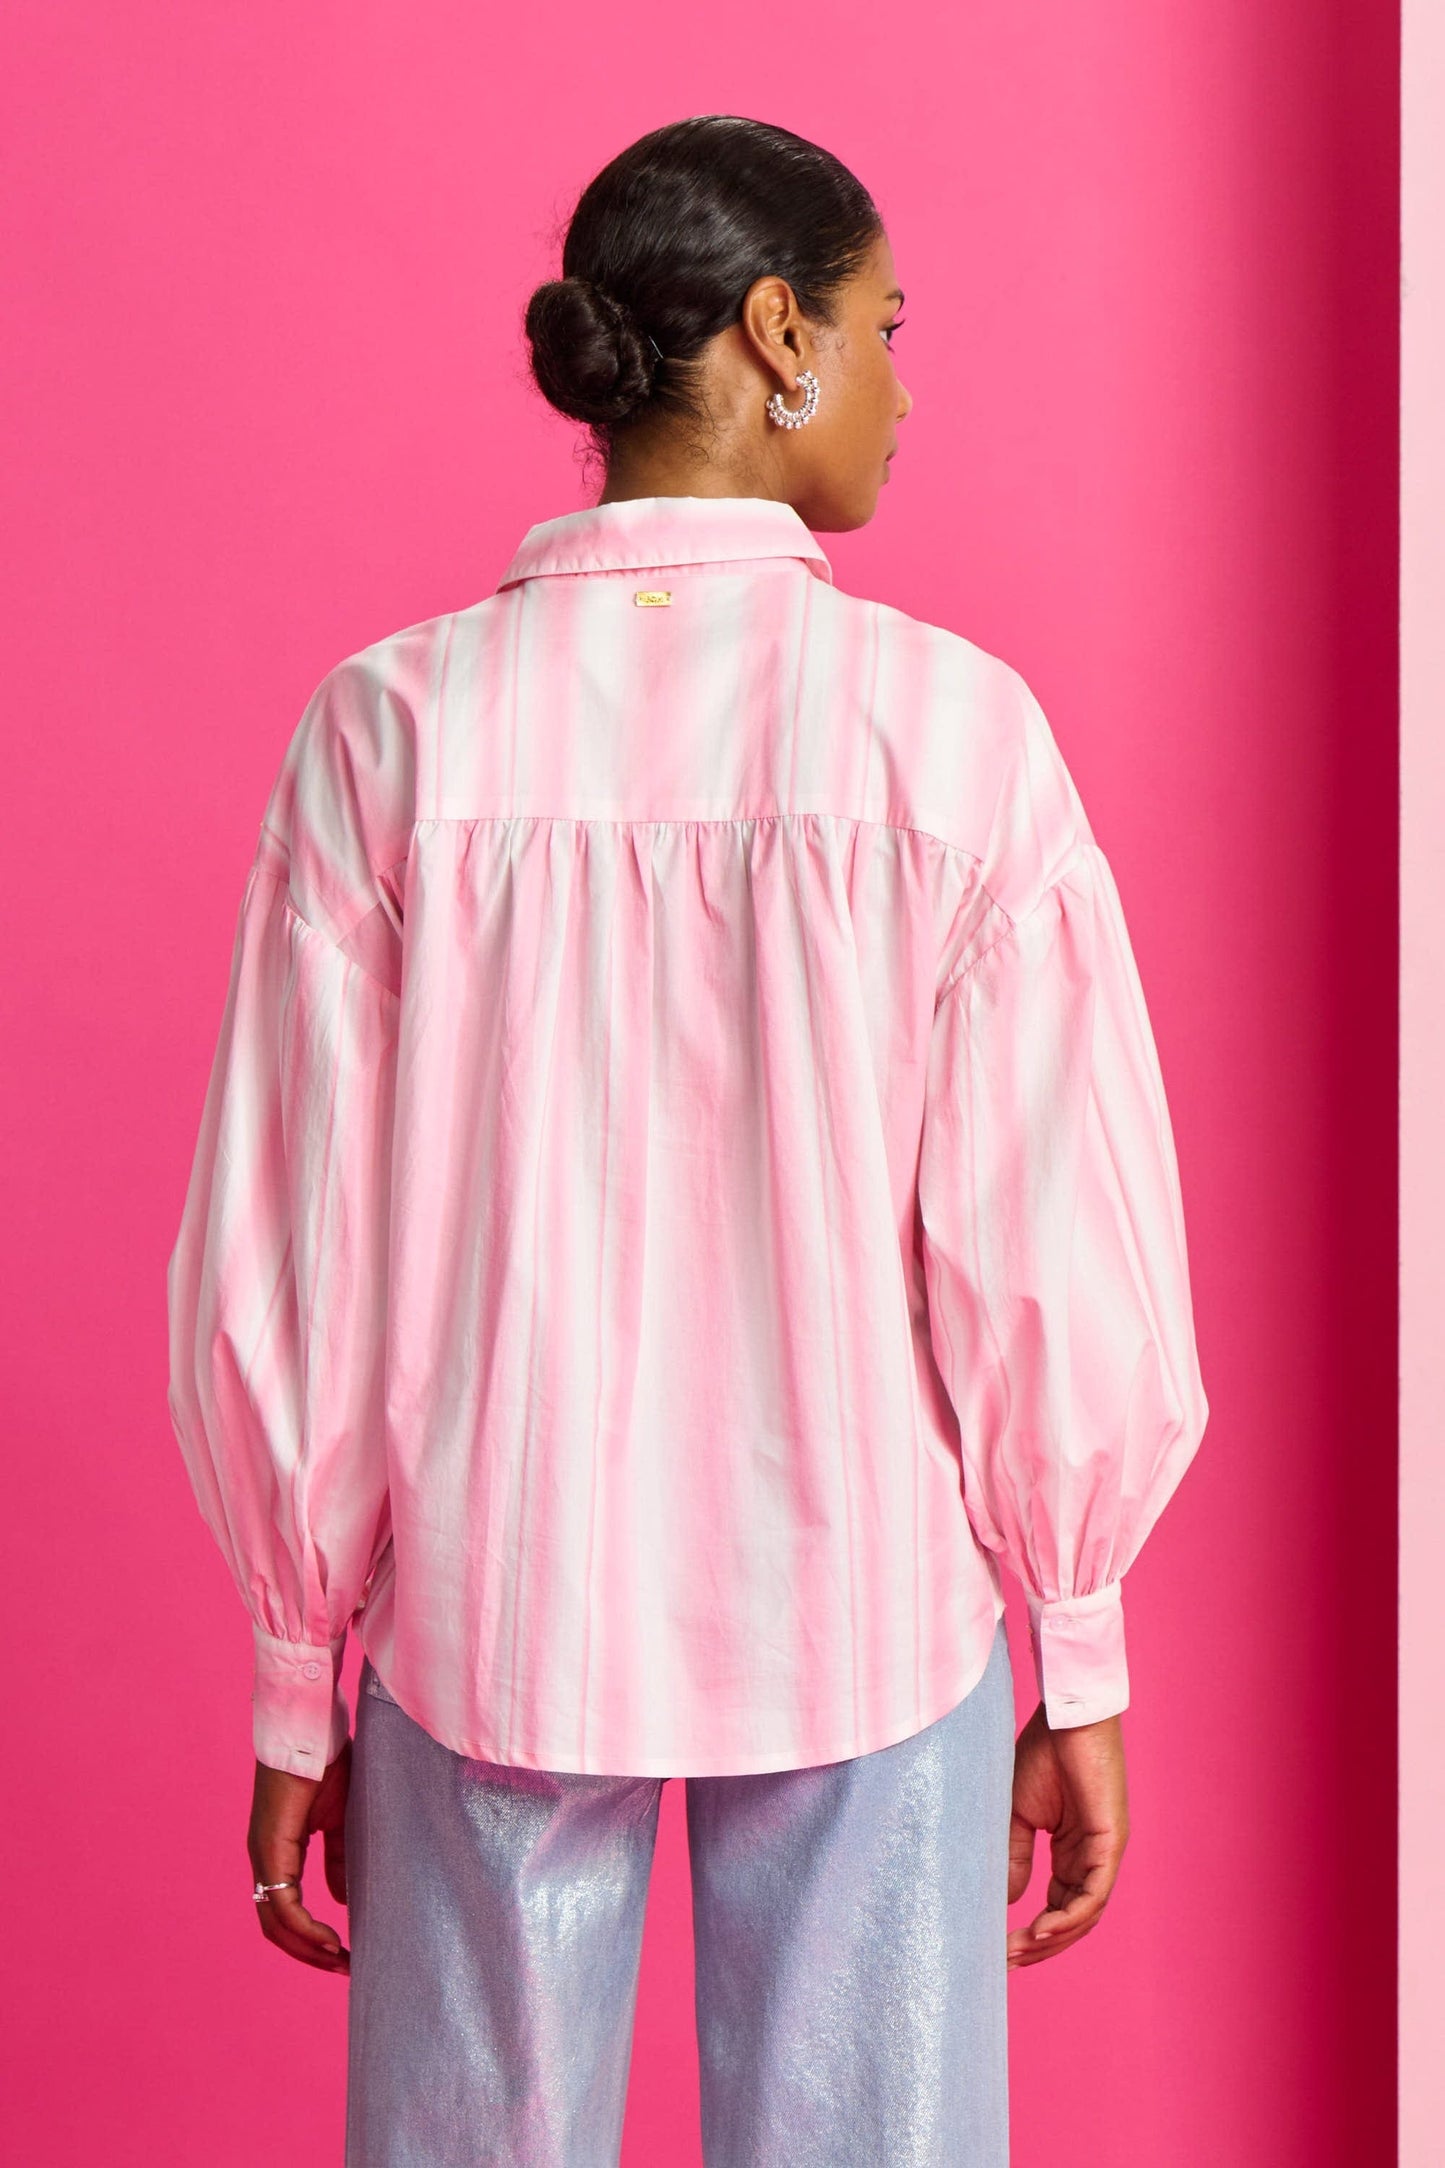 BLUSE - Embroidery Striped Pink